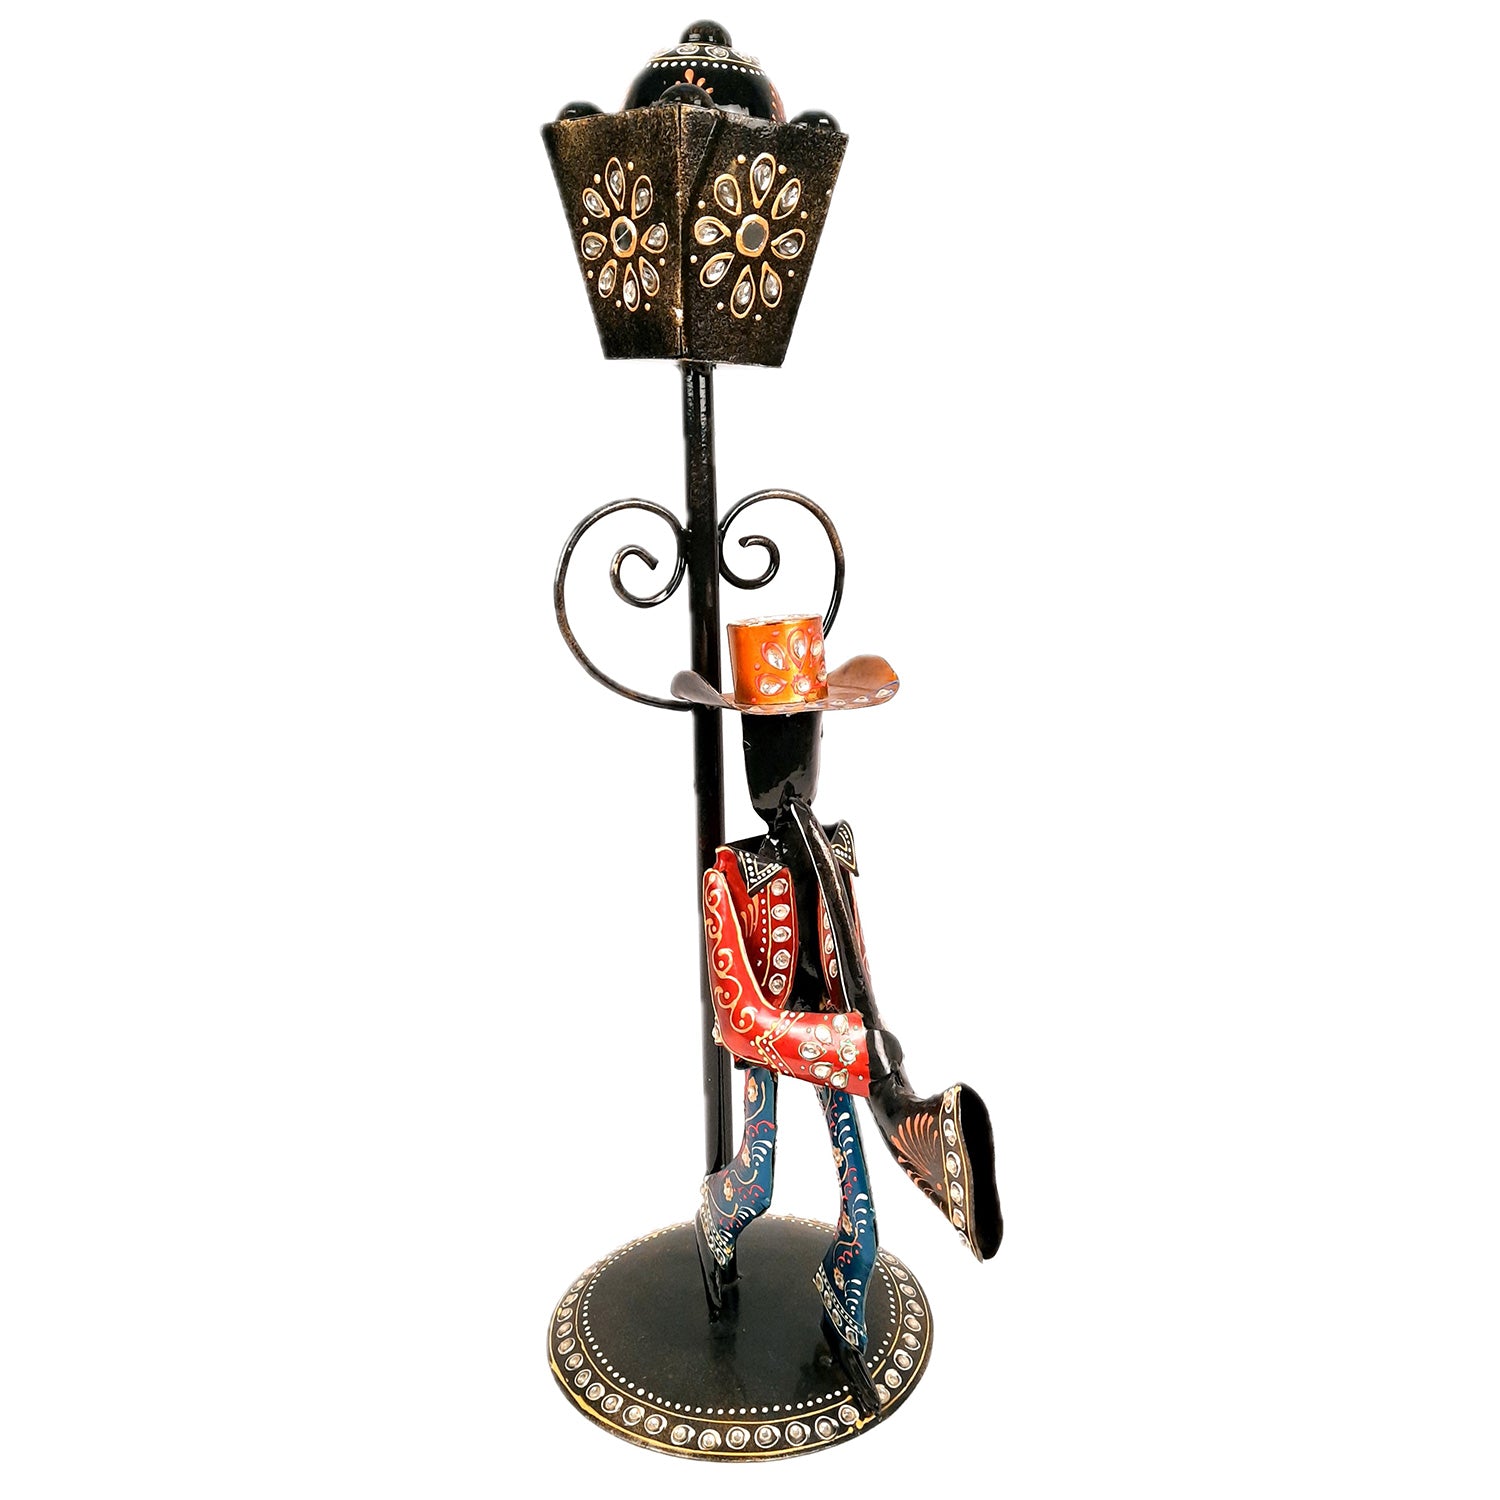 Showpiece Set - Musician Playing Musical Instrument Under Lamp Post | Handicraft Figurines With Kundan Work - For Table, Living Room, Bedroom & TV Unit | Big Show Piece For Office Desk & Gifts- 22 Inch (Set of 2) - apkamart